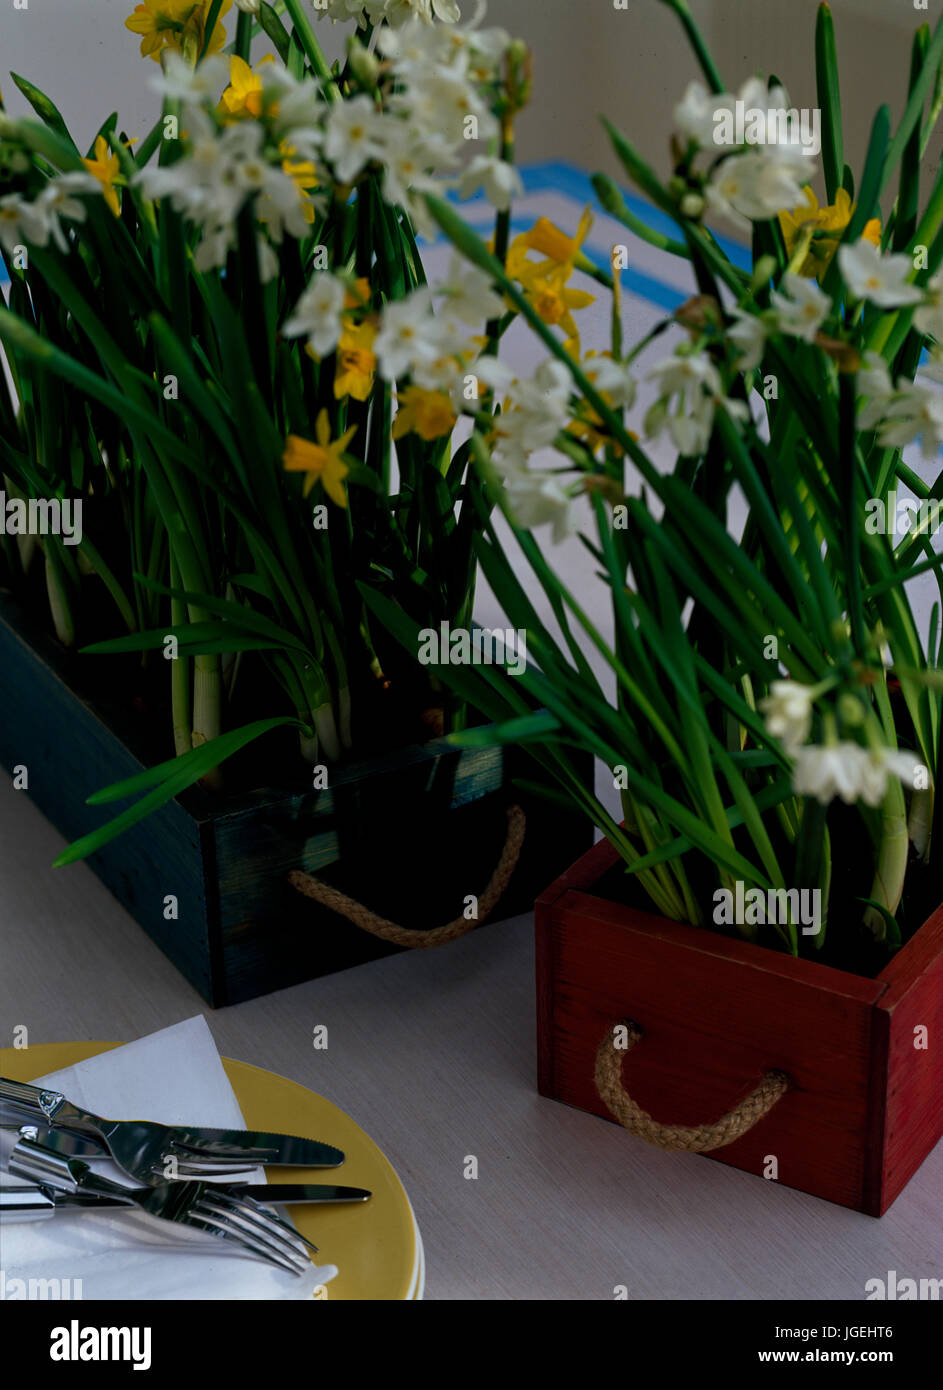 Paper white and tete a tete daffodils in wooden boxes with rope handles Stock Photo